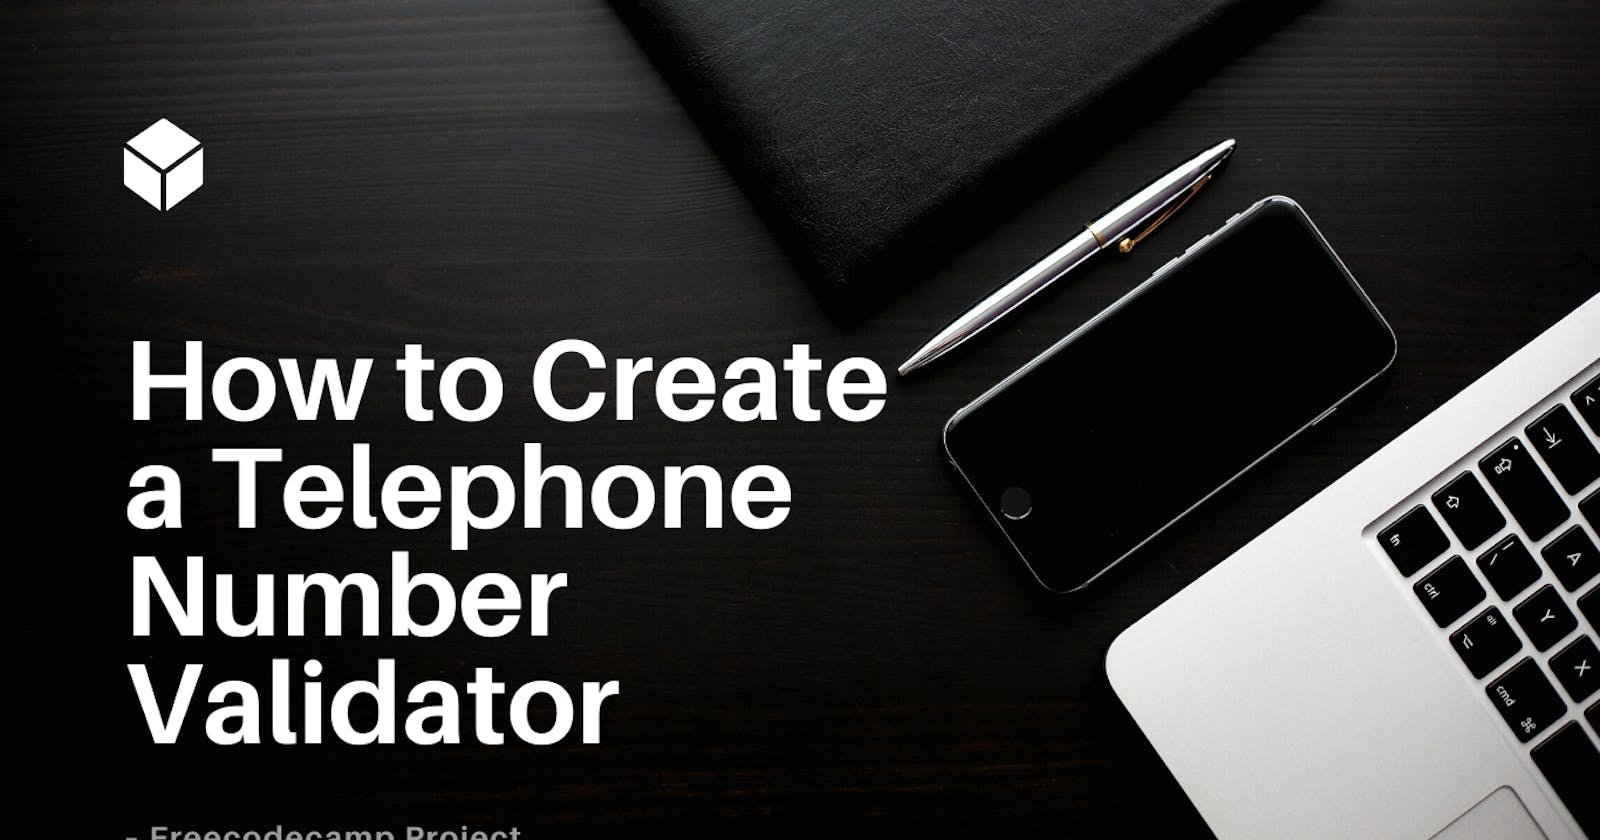 How to Create a Telephone Number Validator – Freecodecamp Project